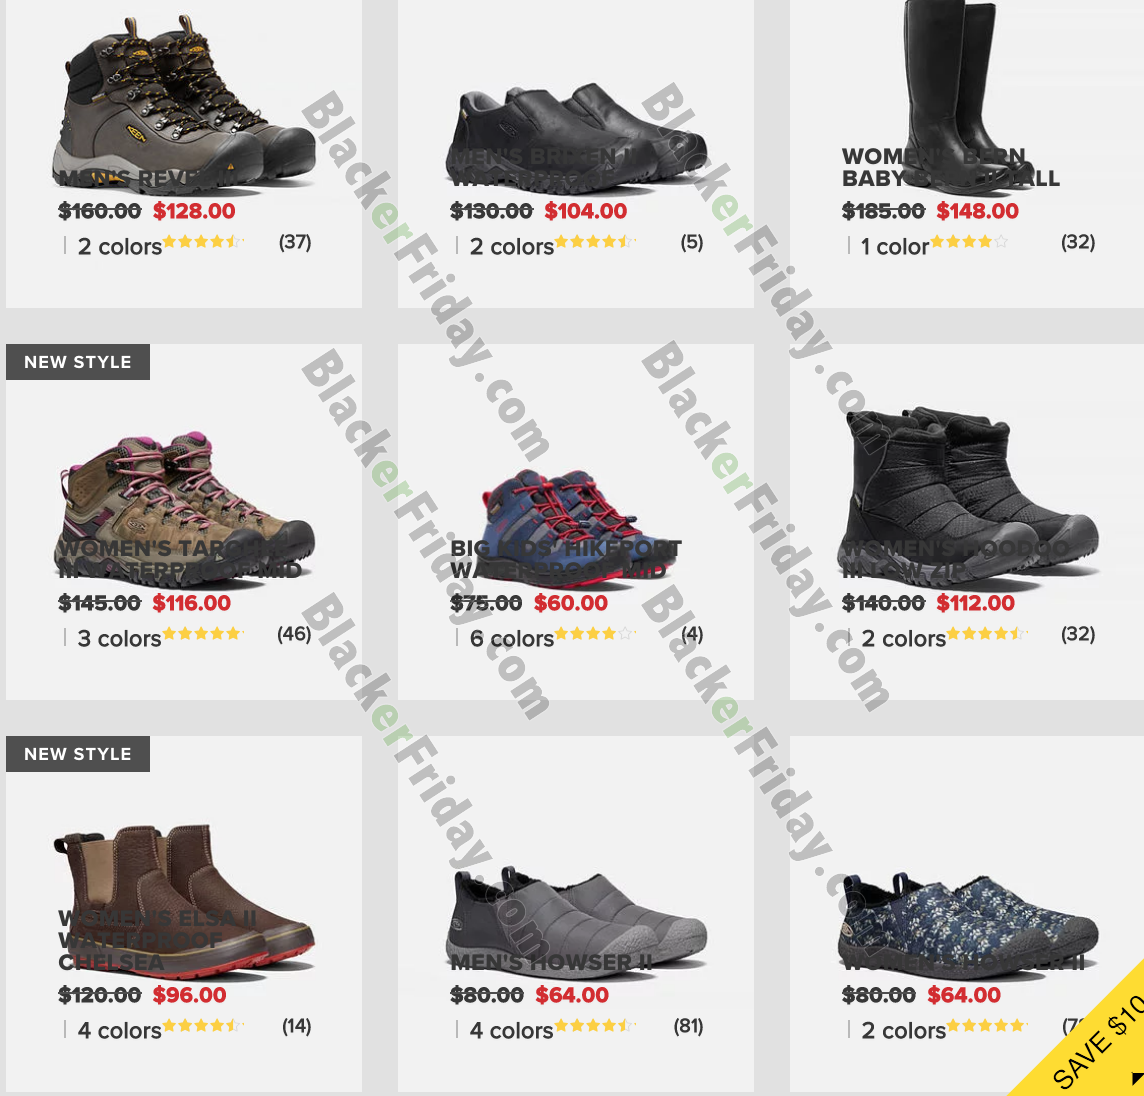 Keen Black Friday 2020 Sale - What to 